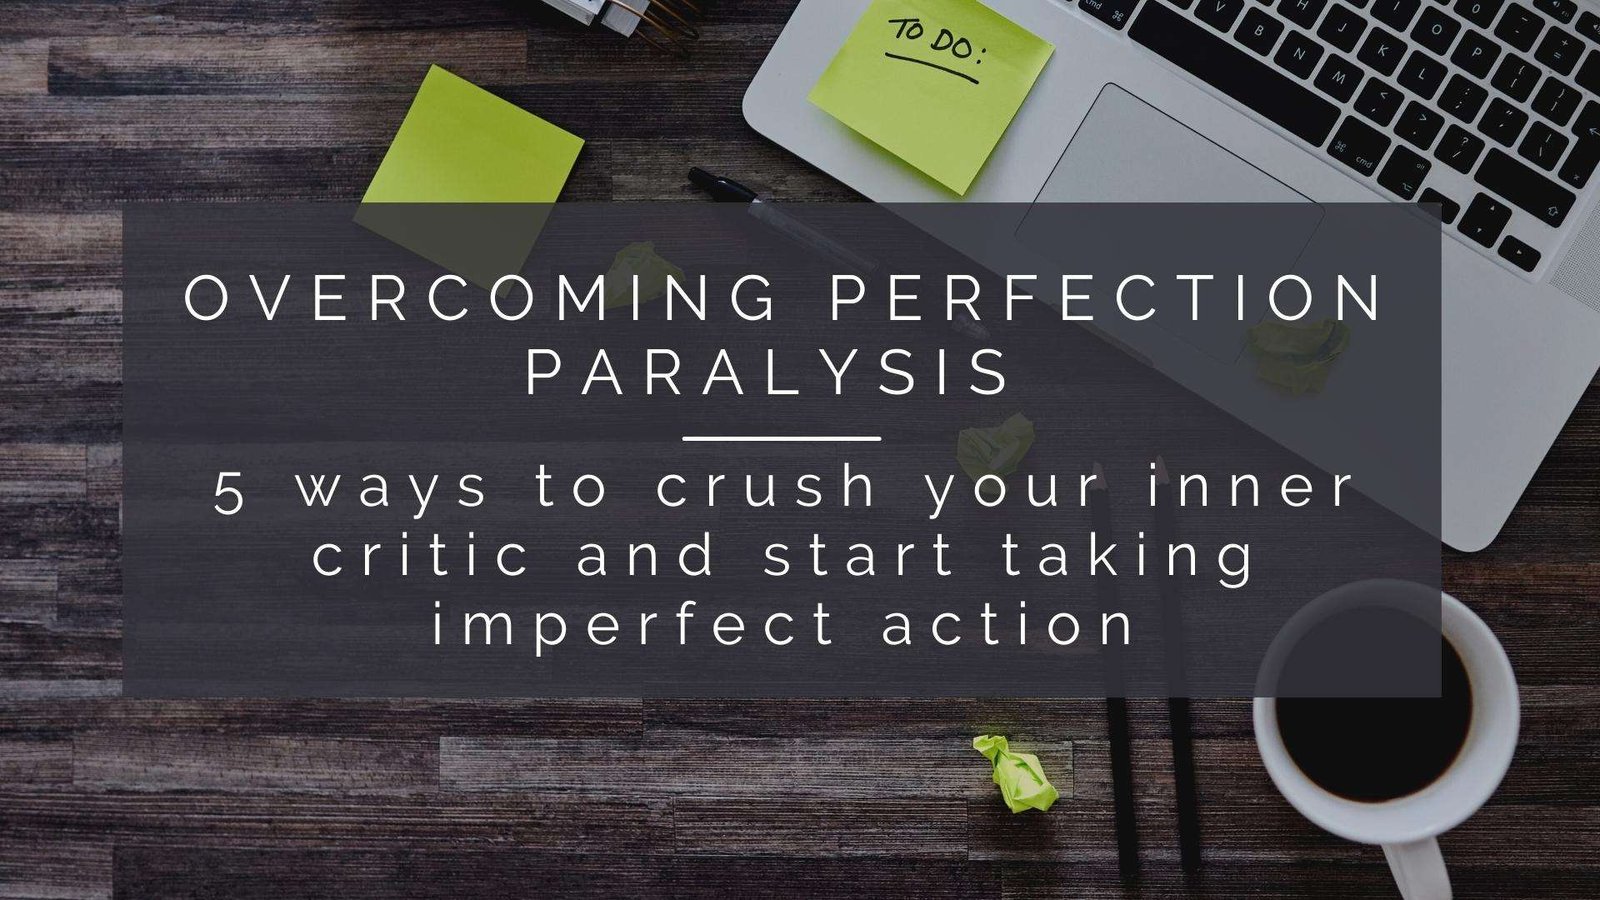 Overcoming Perfection paralysis – 5 ways to crush your inner critic